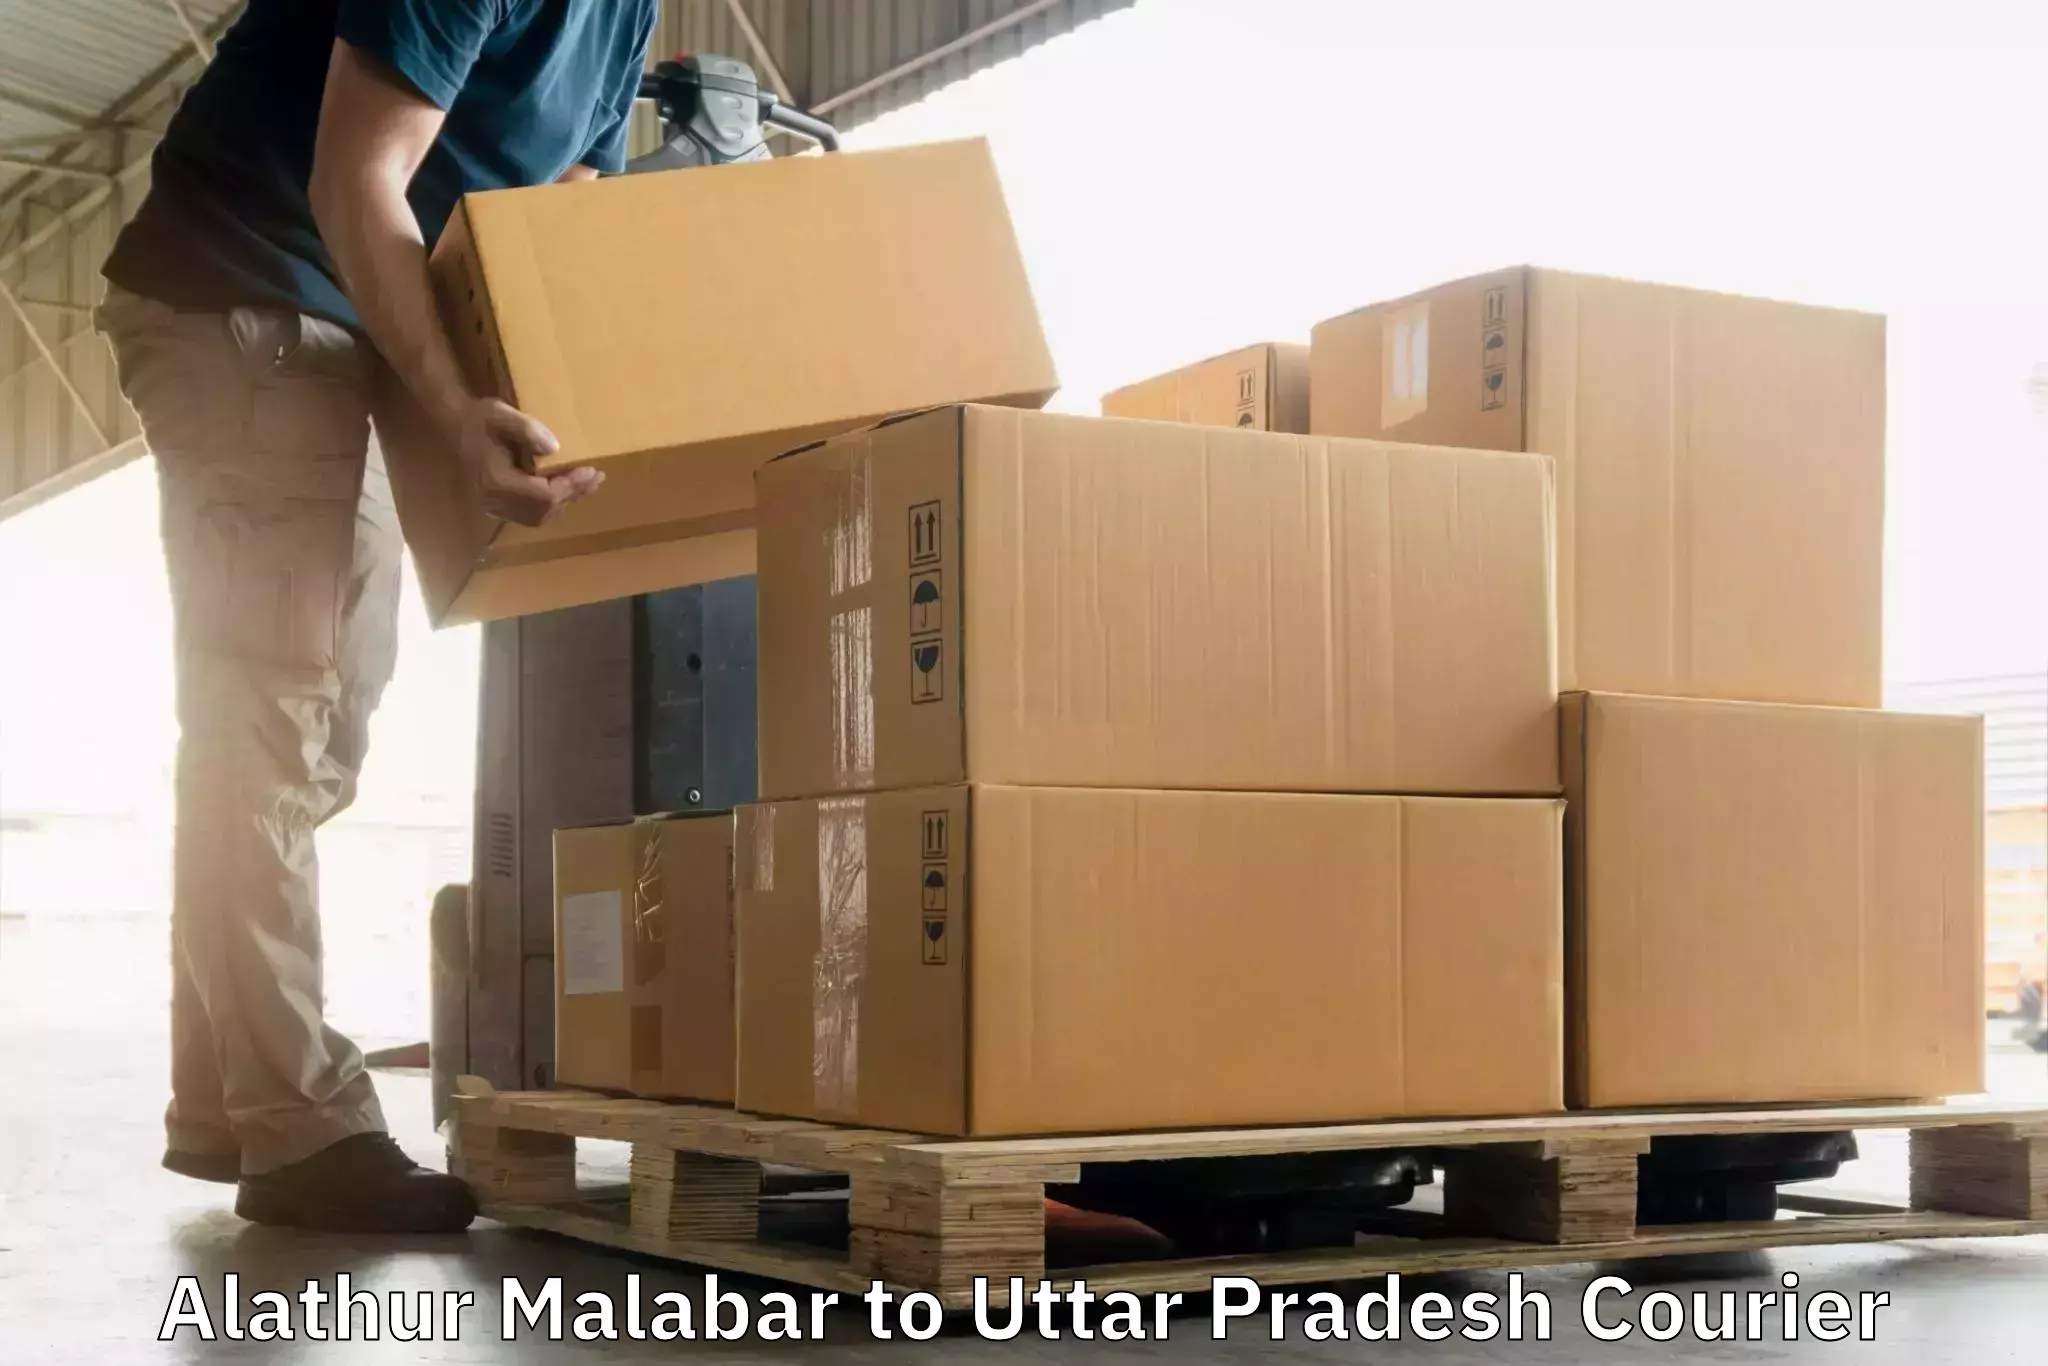 Nationwide shipping coverage Alathur Malabar to IIT Kanpur